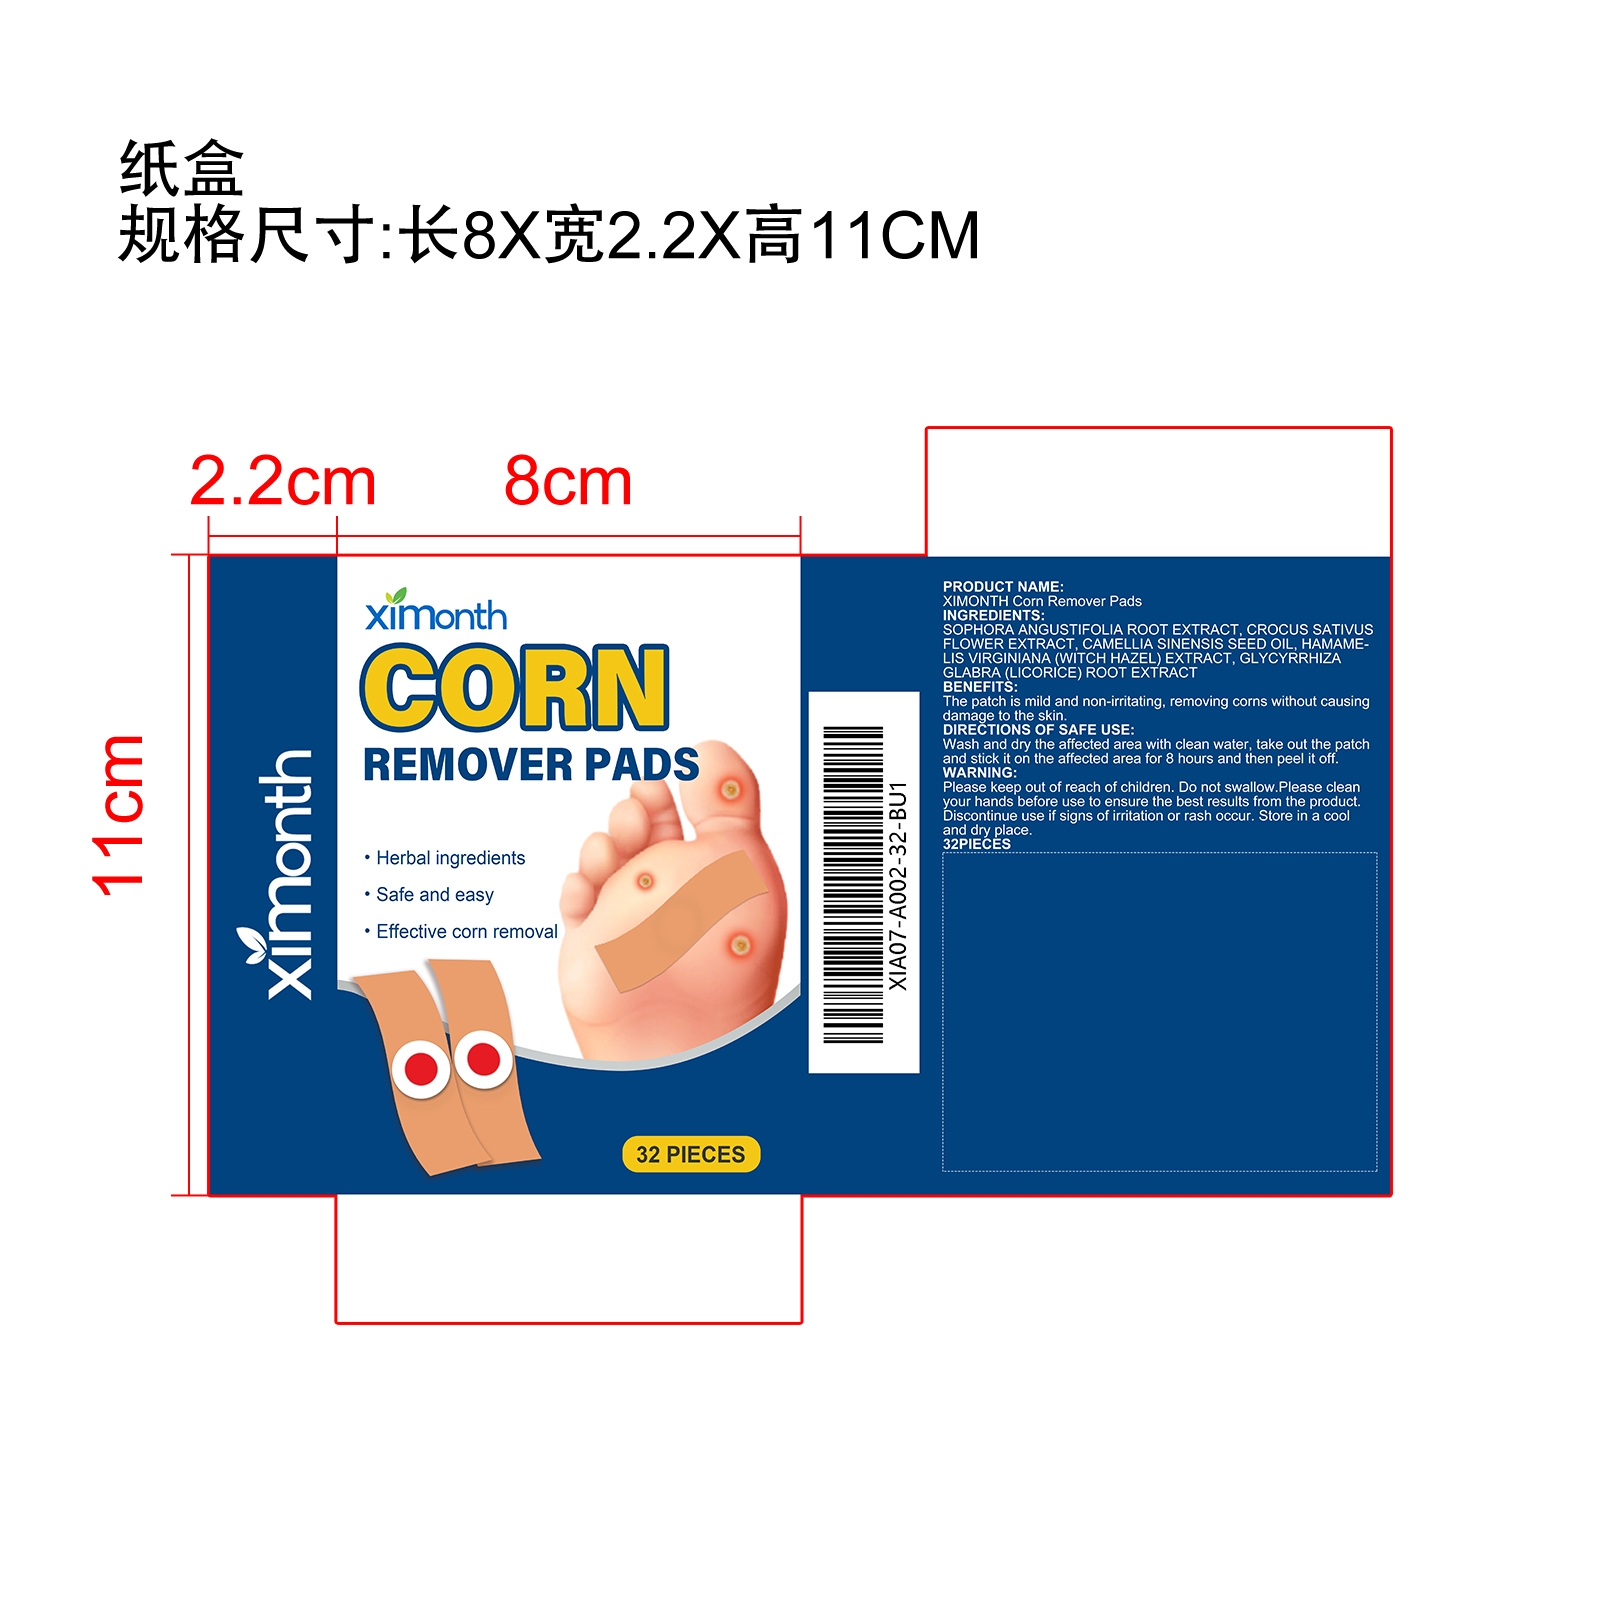  Package label